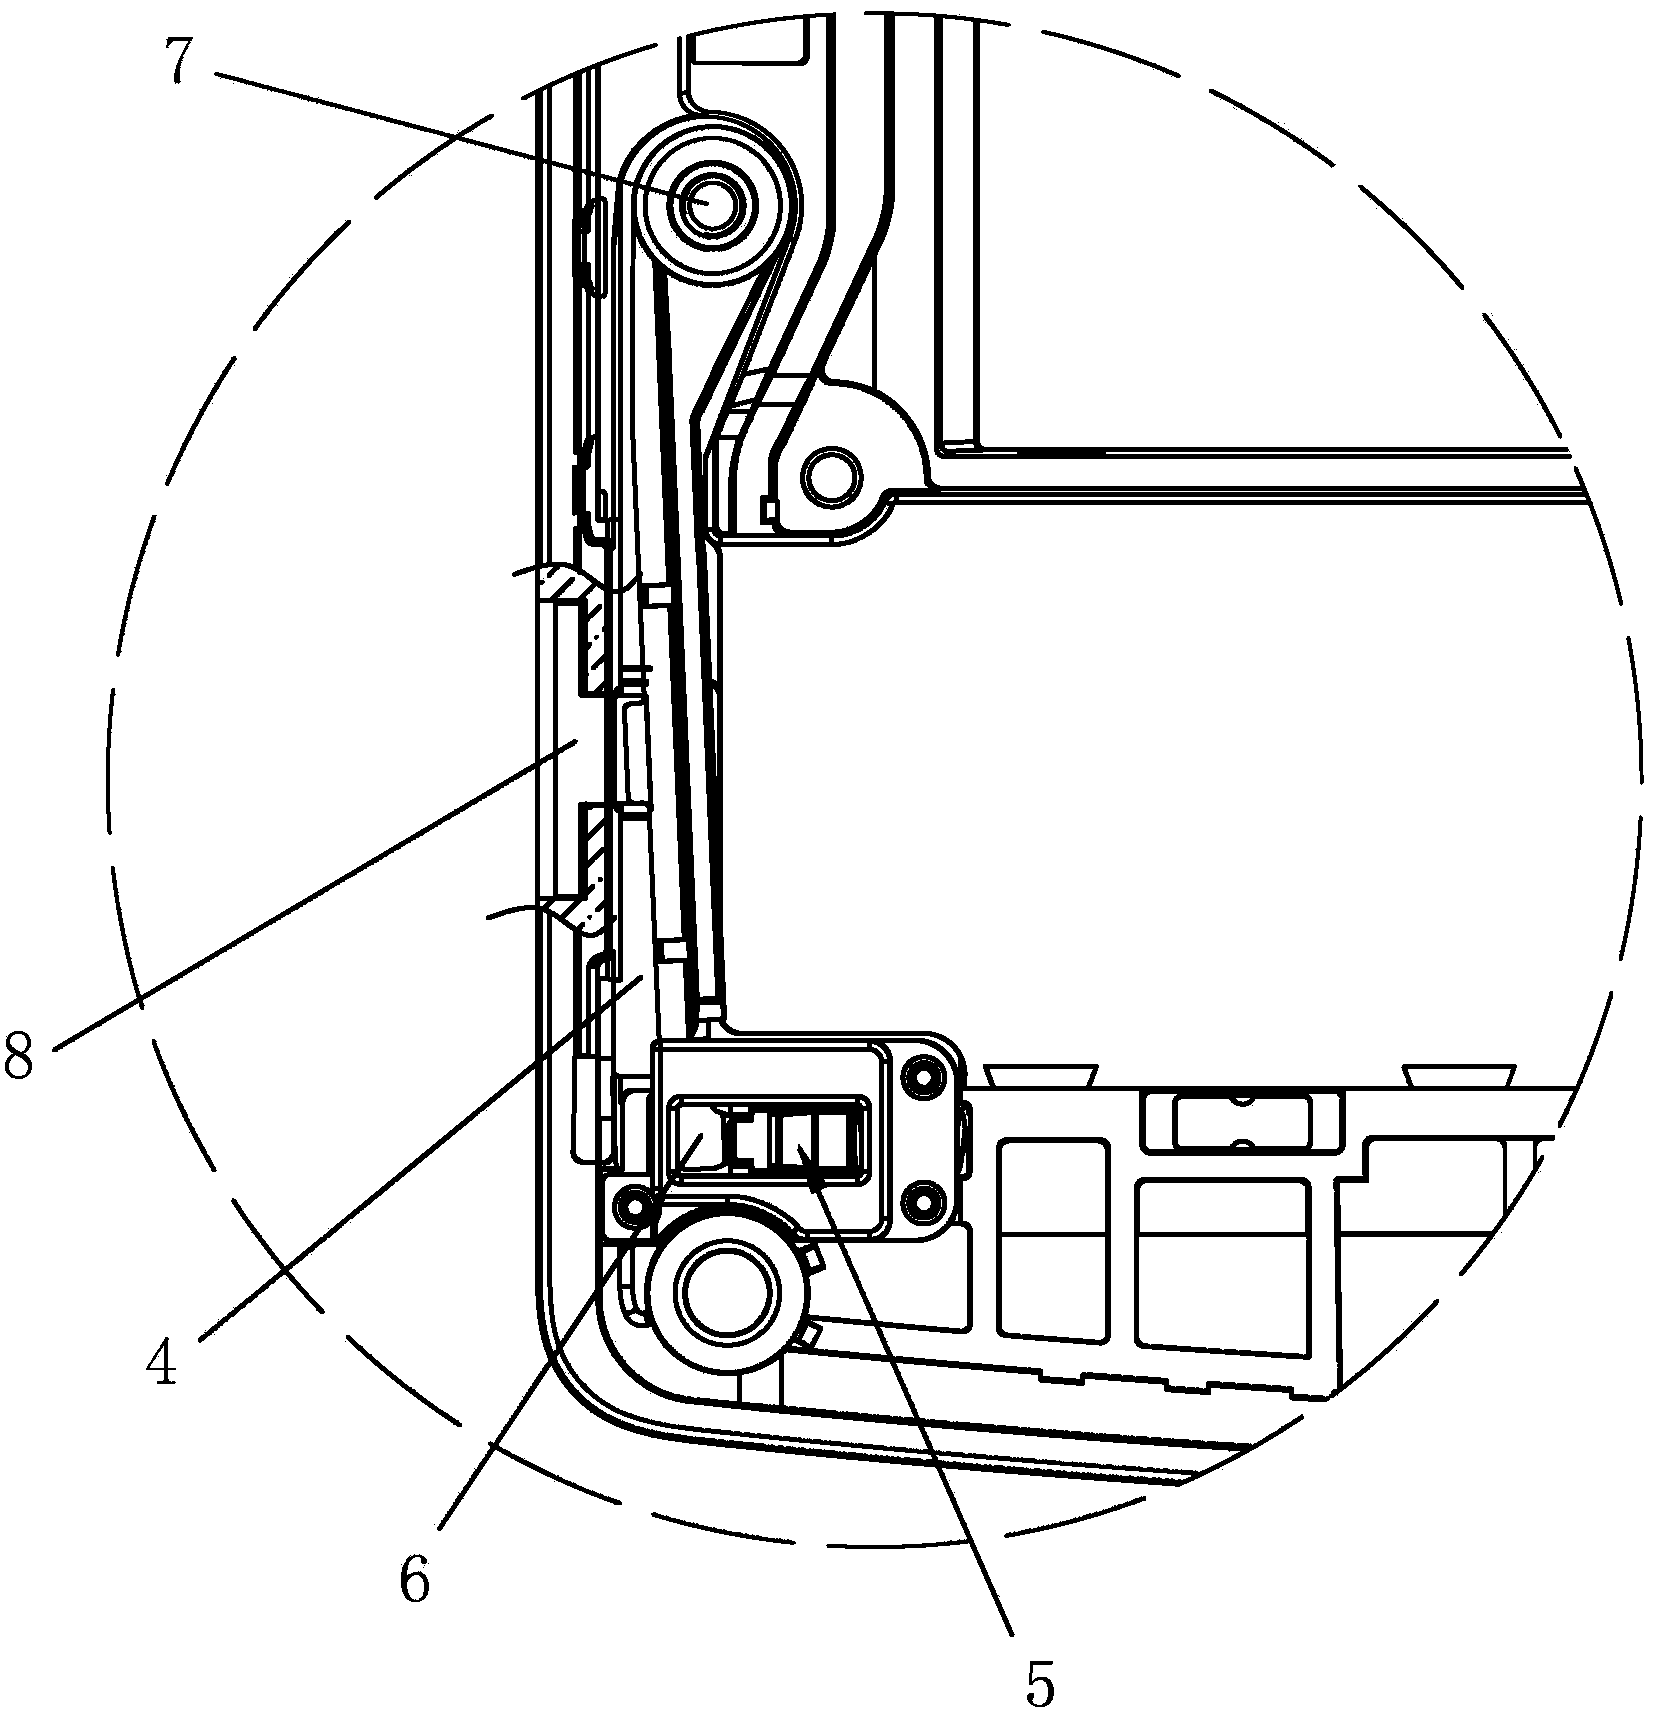 Rod-thumbing cover opening structure for battery cover